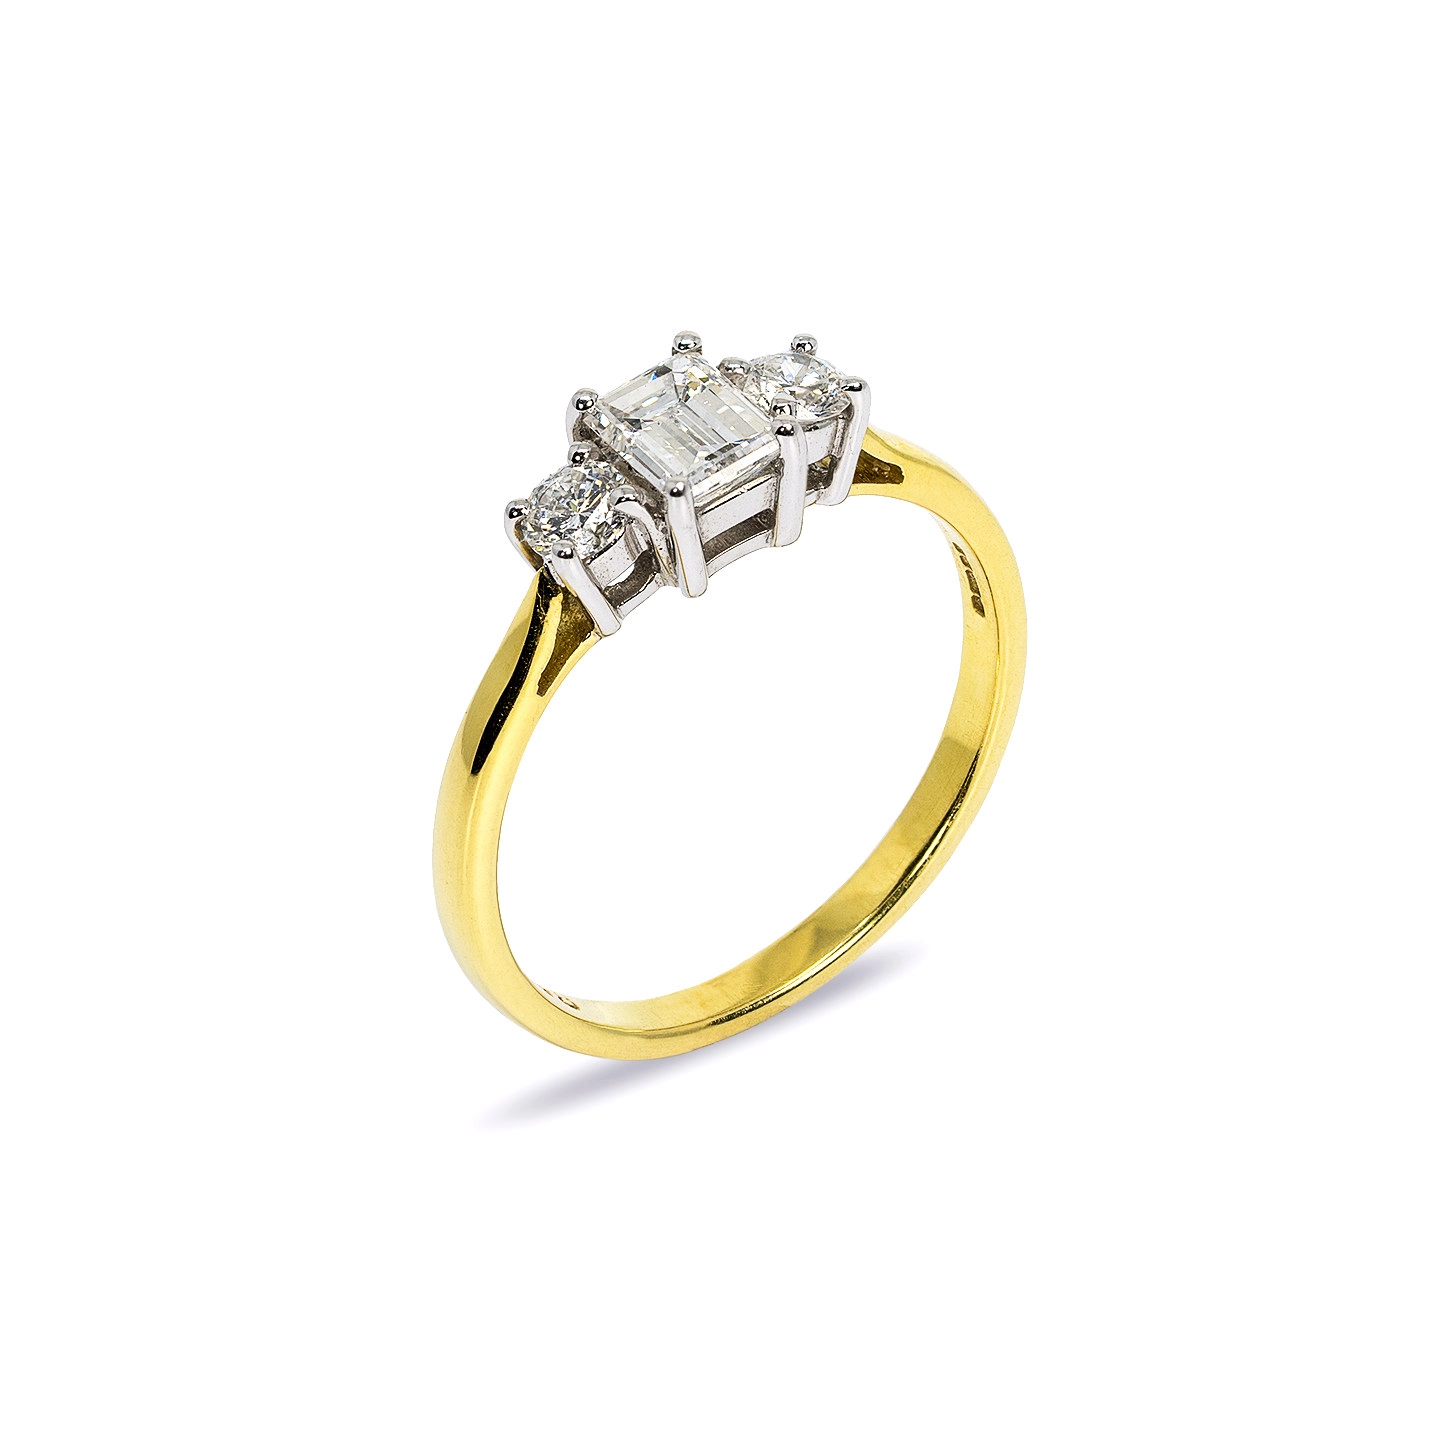 Chateaux - 18ct. Yellow Gold 3-Stone Diamond Engagement Ring - 0.55cts